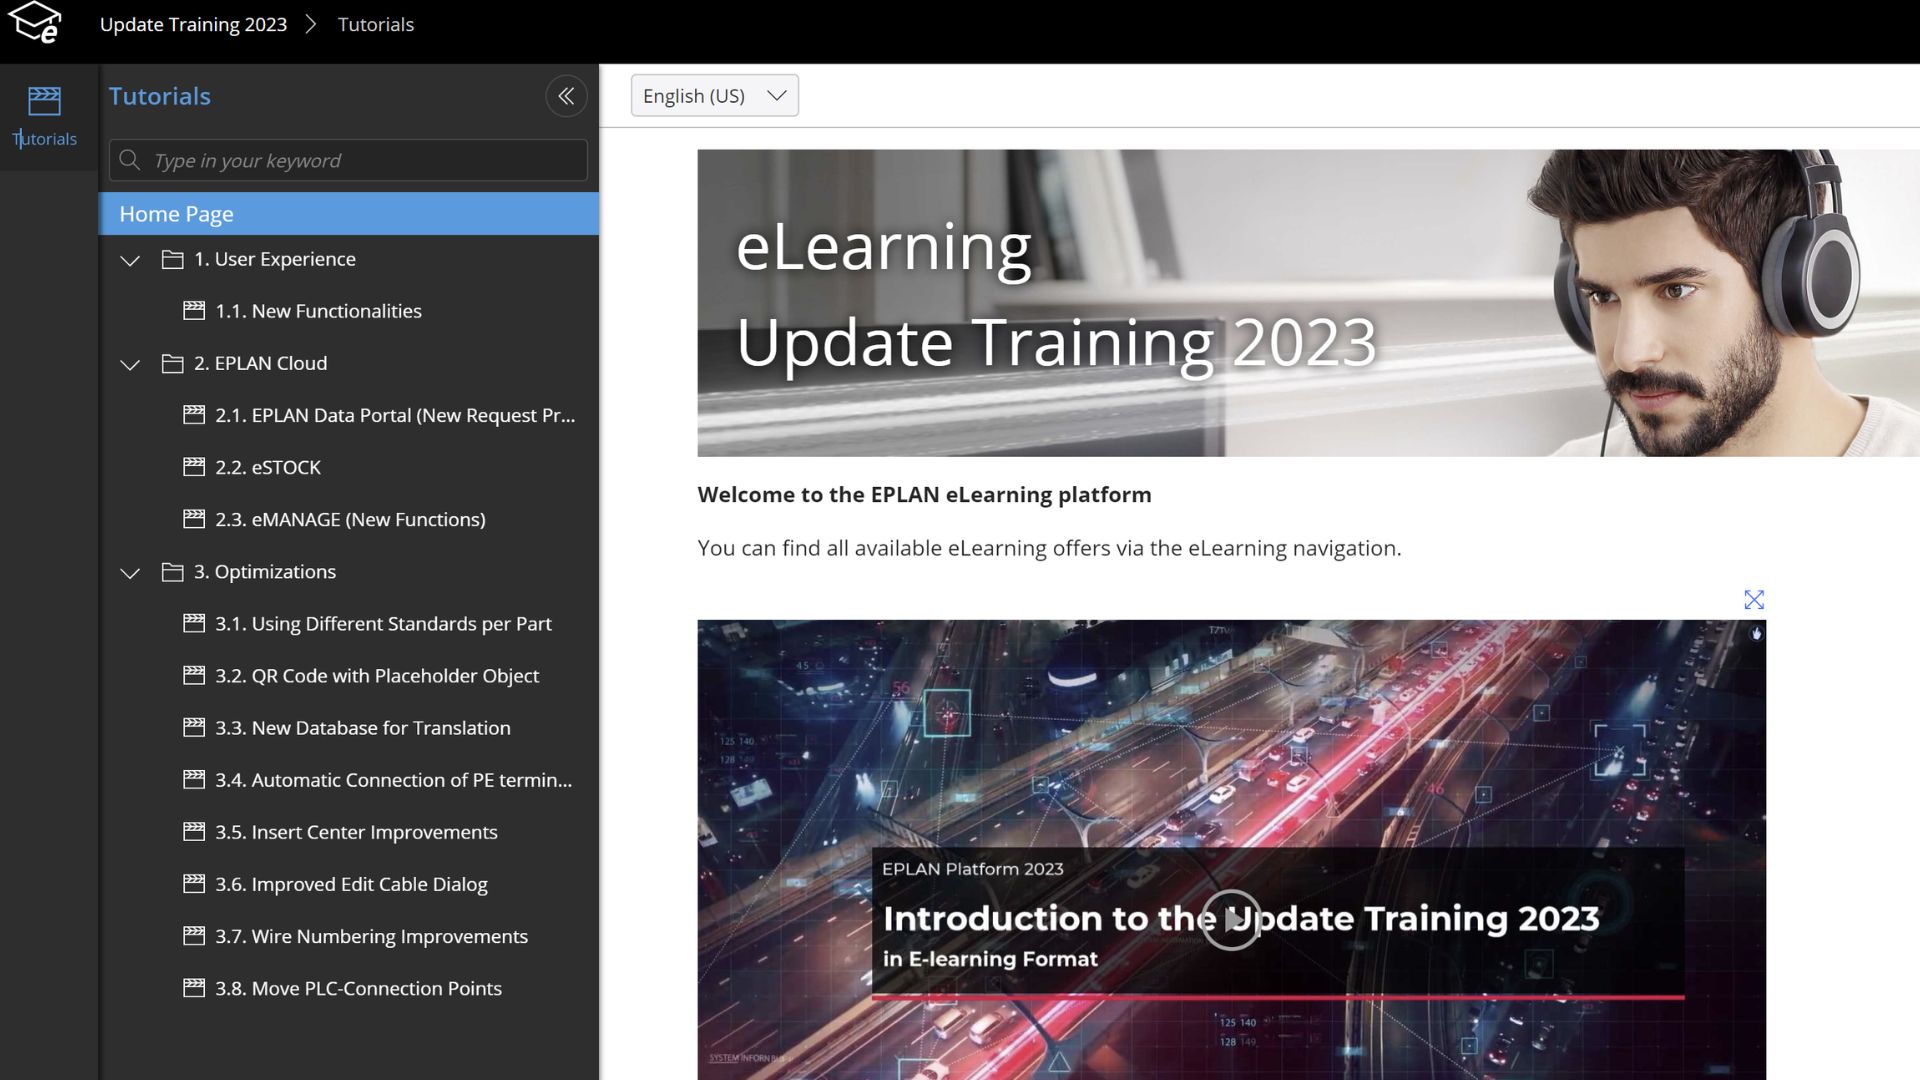 EPLAN eLearning courses on Cloud